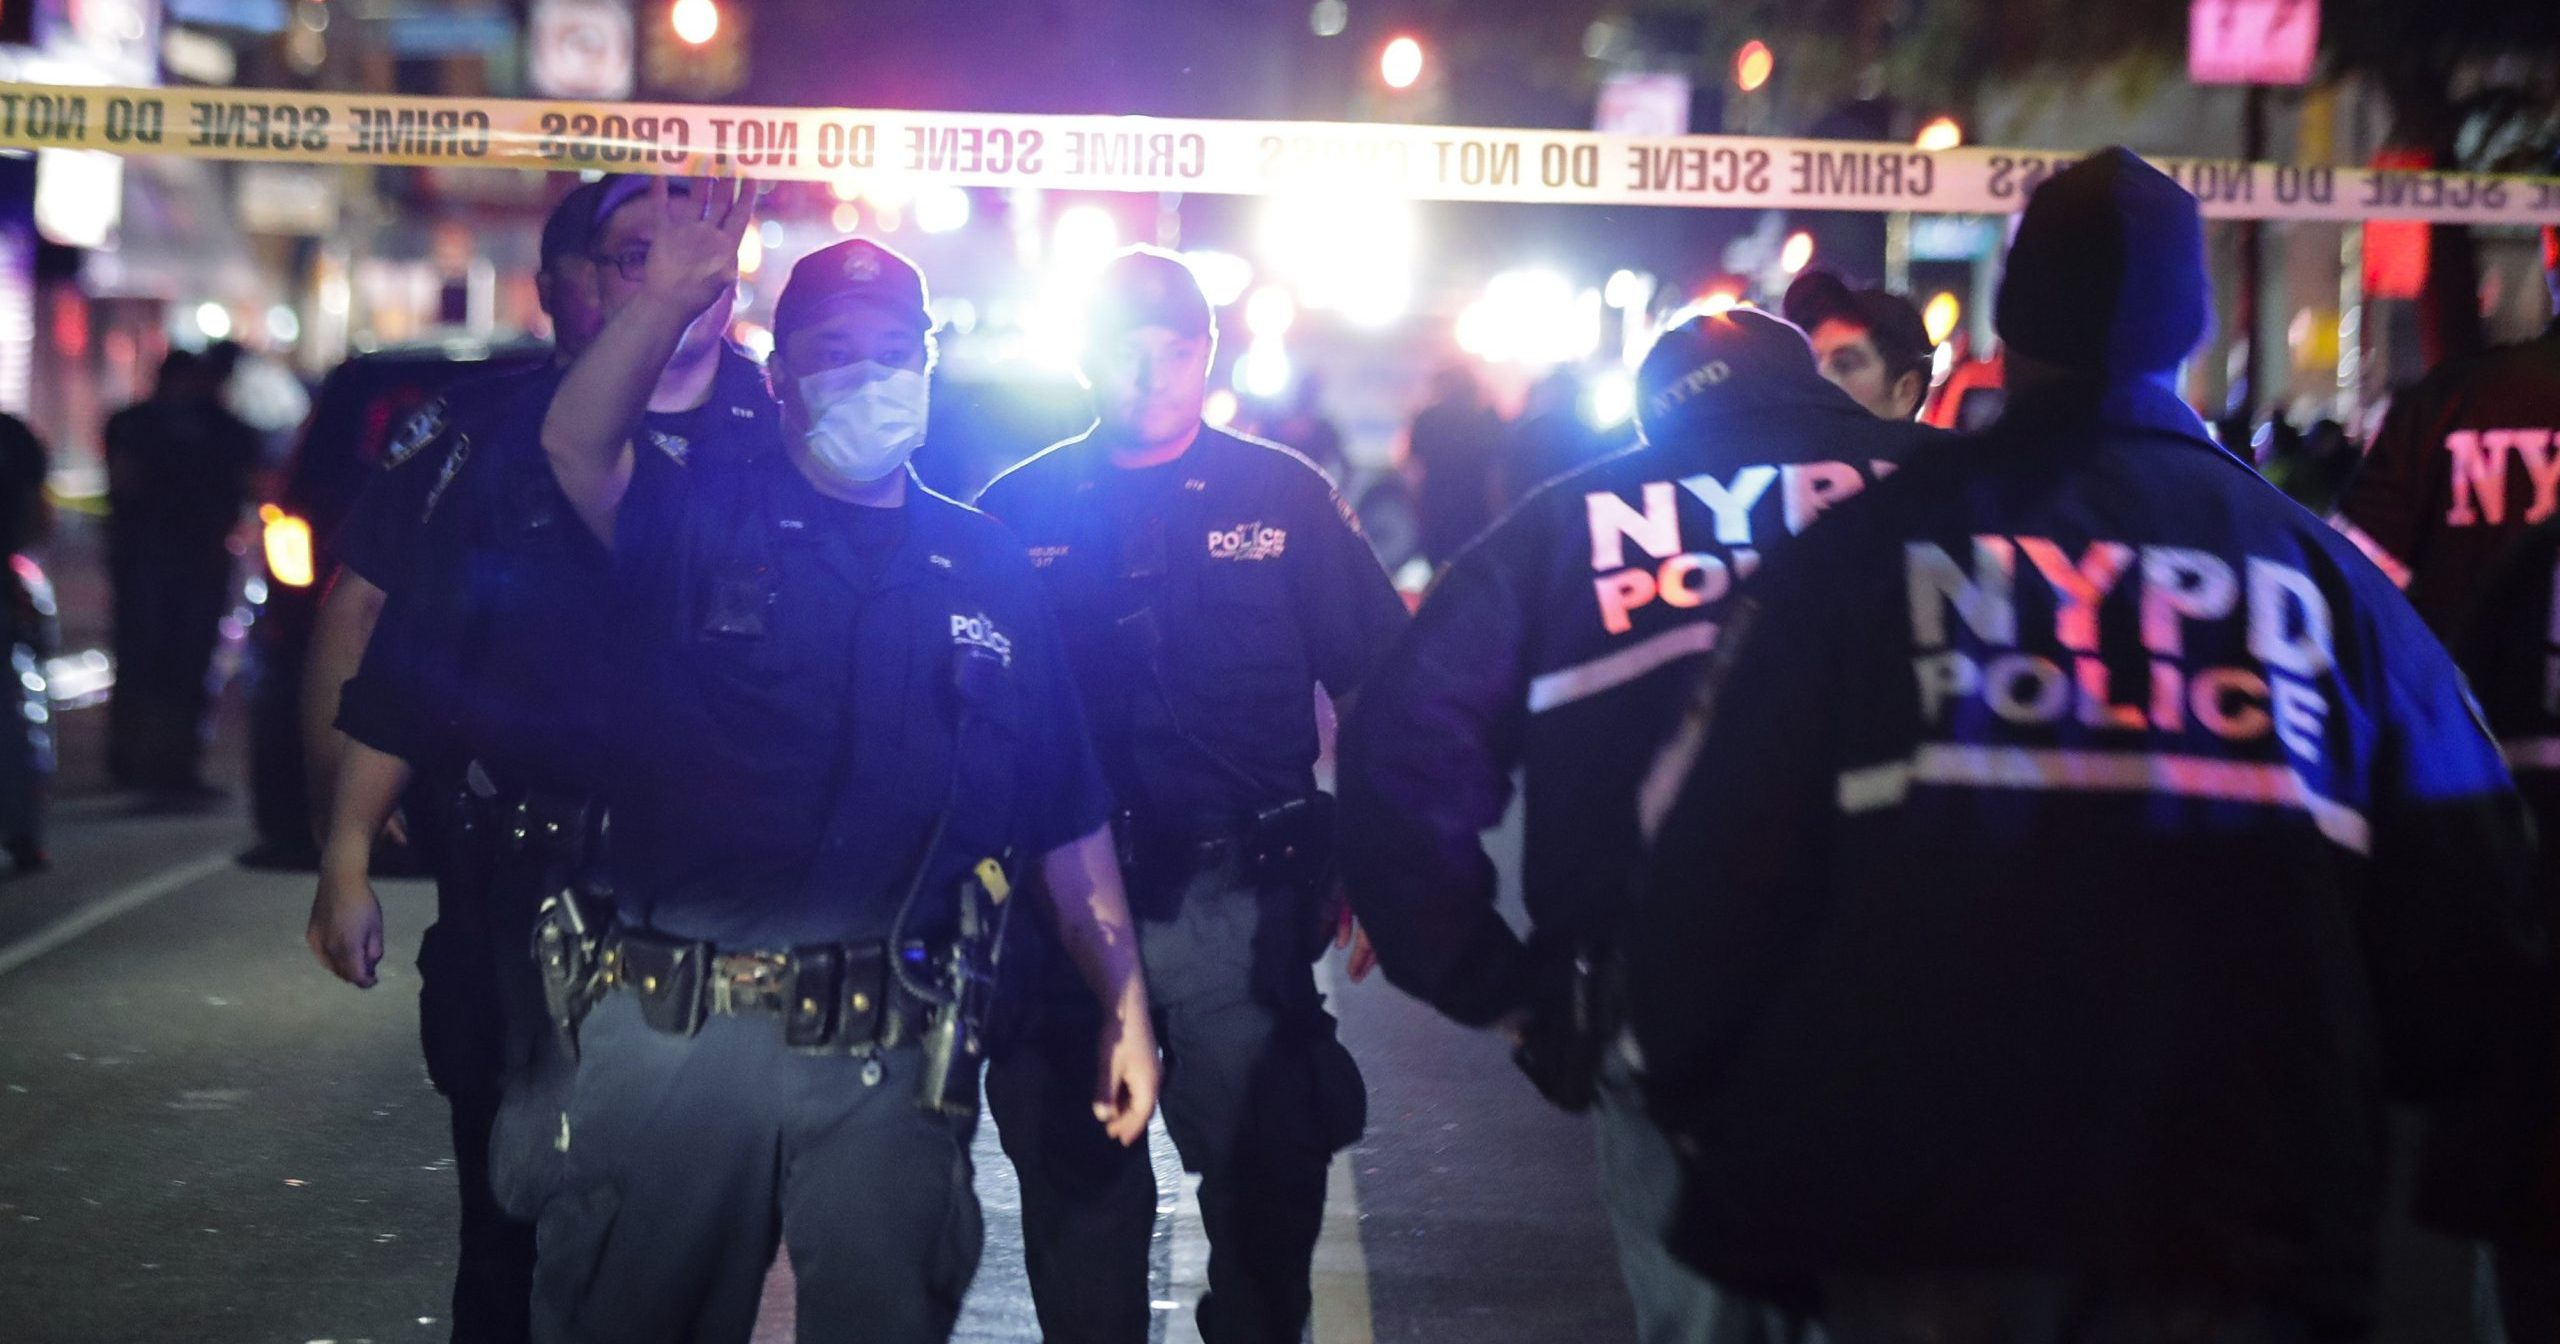 New York City police officers work a scene on June 4, 2020, in the Brooklyn borough of New York. The police department says an officer has been shot in Brooklyn. The shooting happened late Wednesday, nearly four hours after an 8 p.m. curfew went into effect intended to quell unrest over the death of George Floyd in Minnesota.